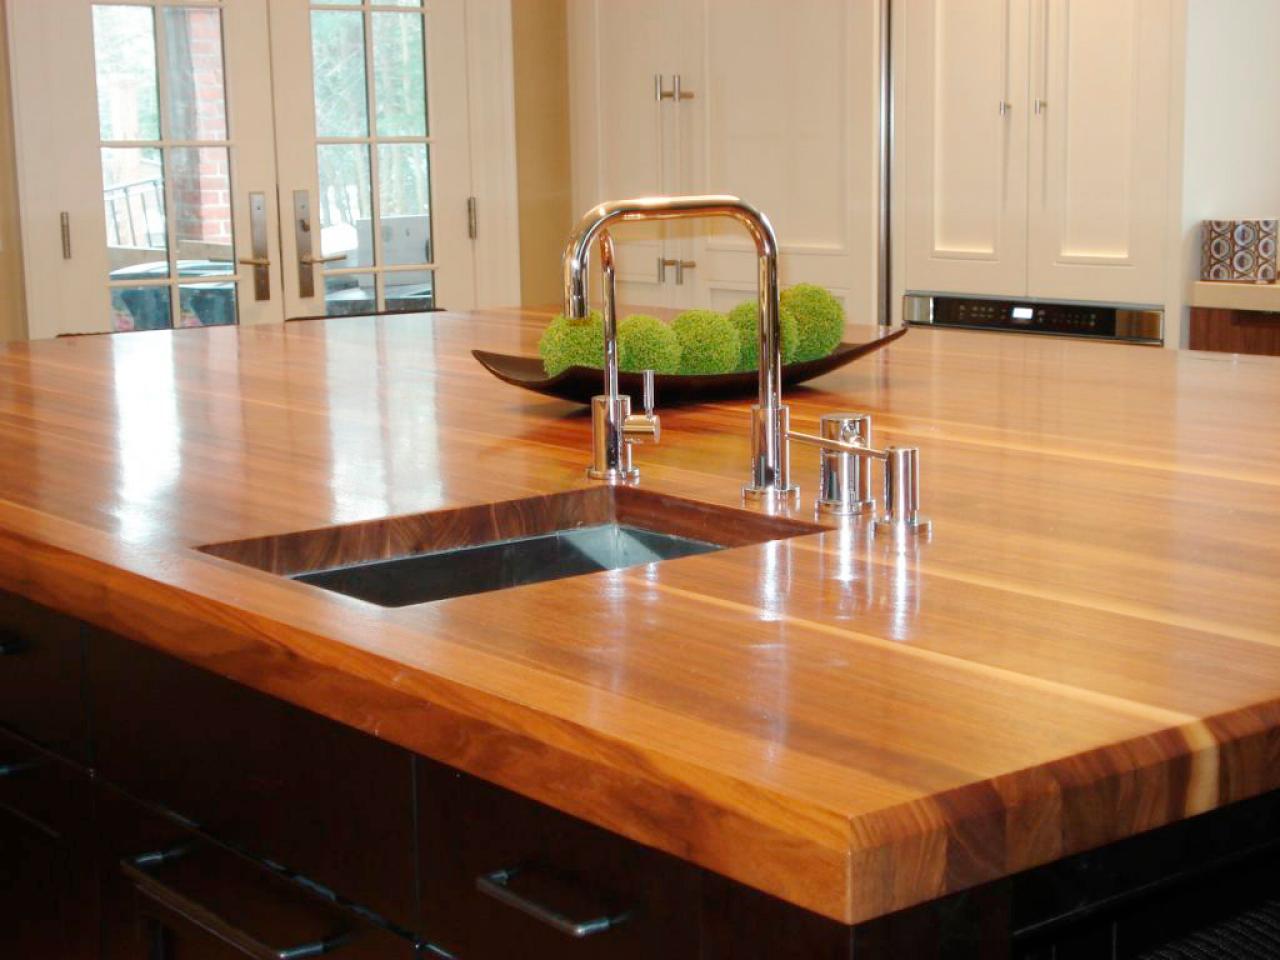 Butcher Block And Wood Countertops, How To Use Wood For Countertops